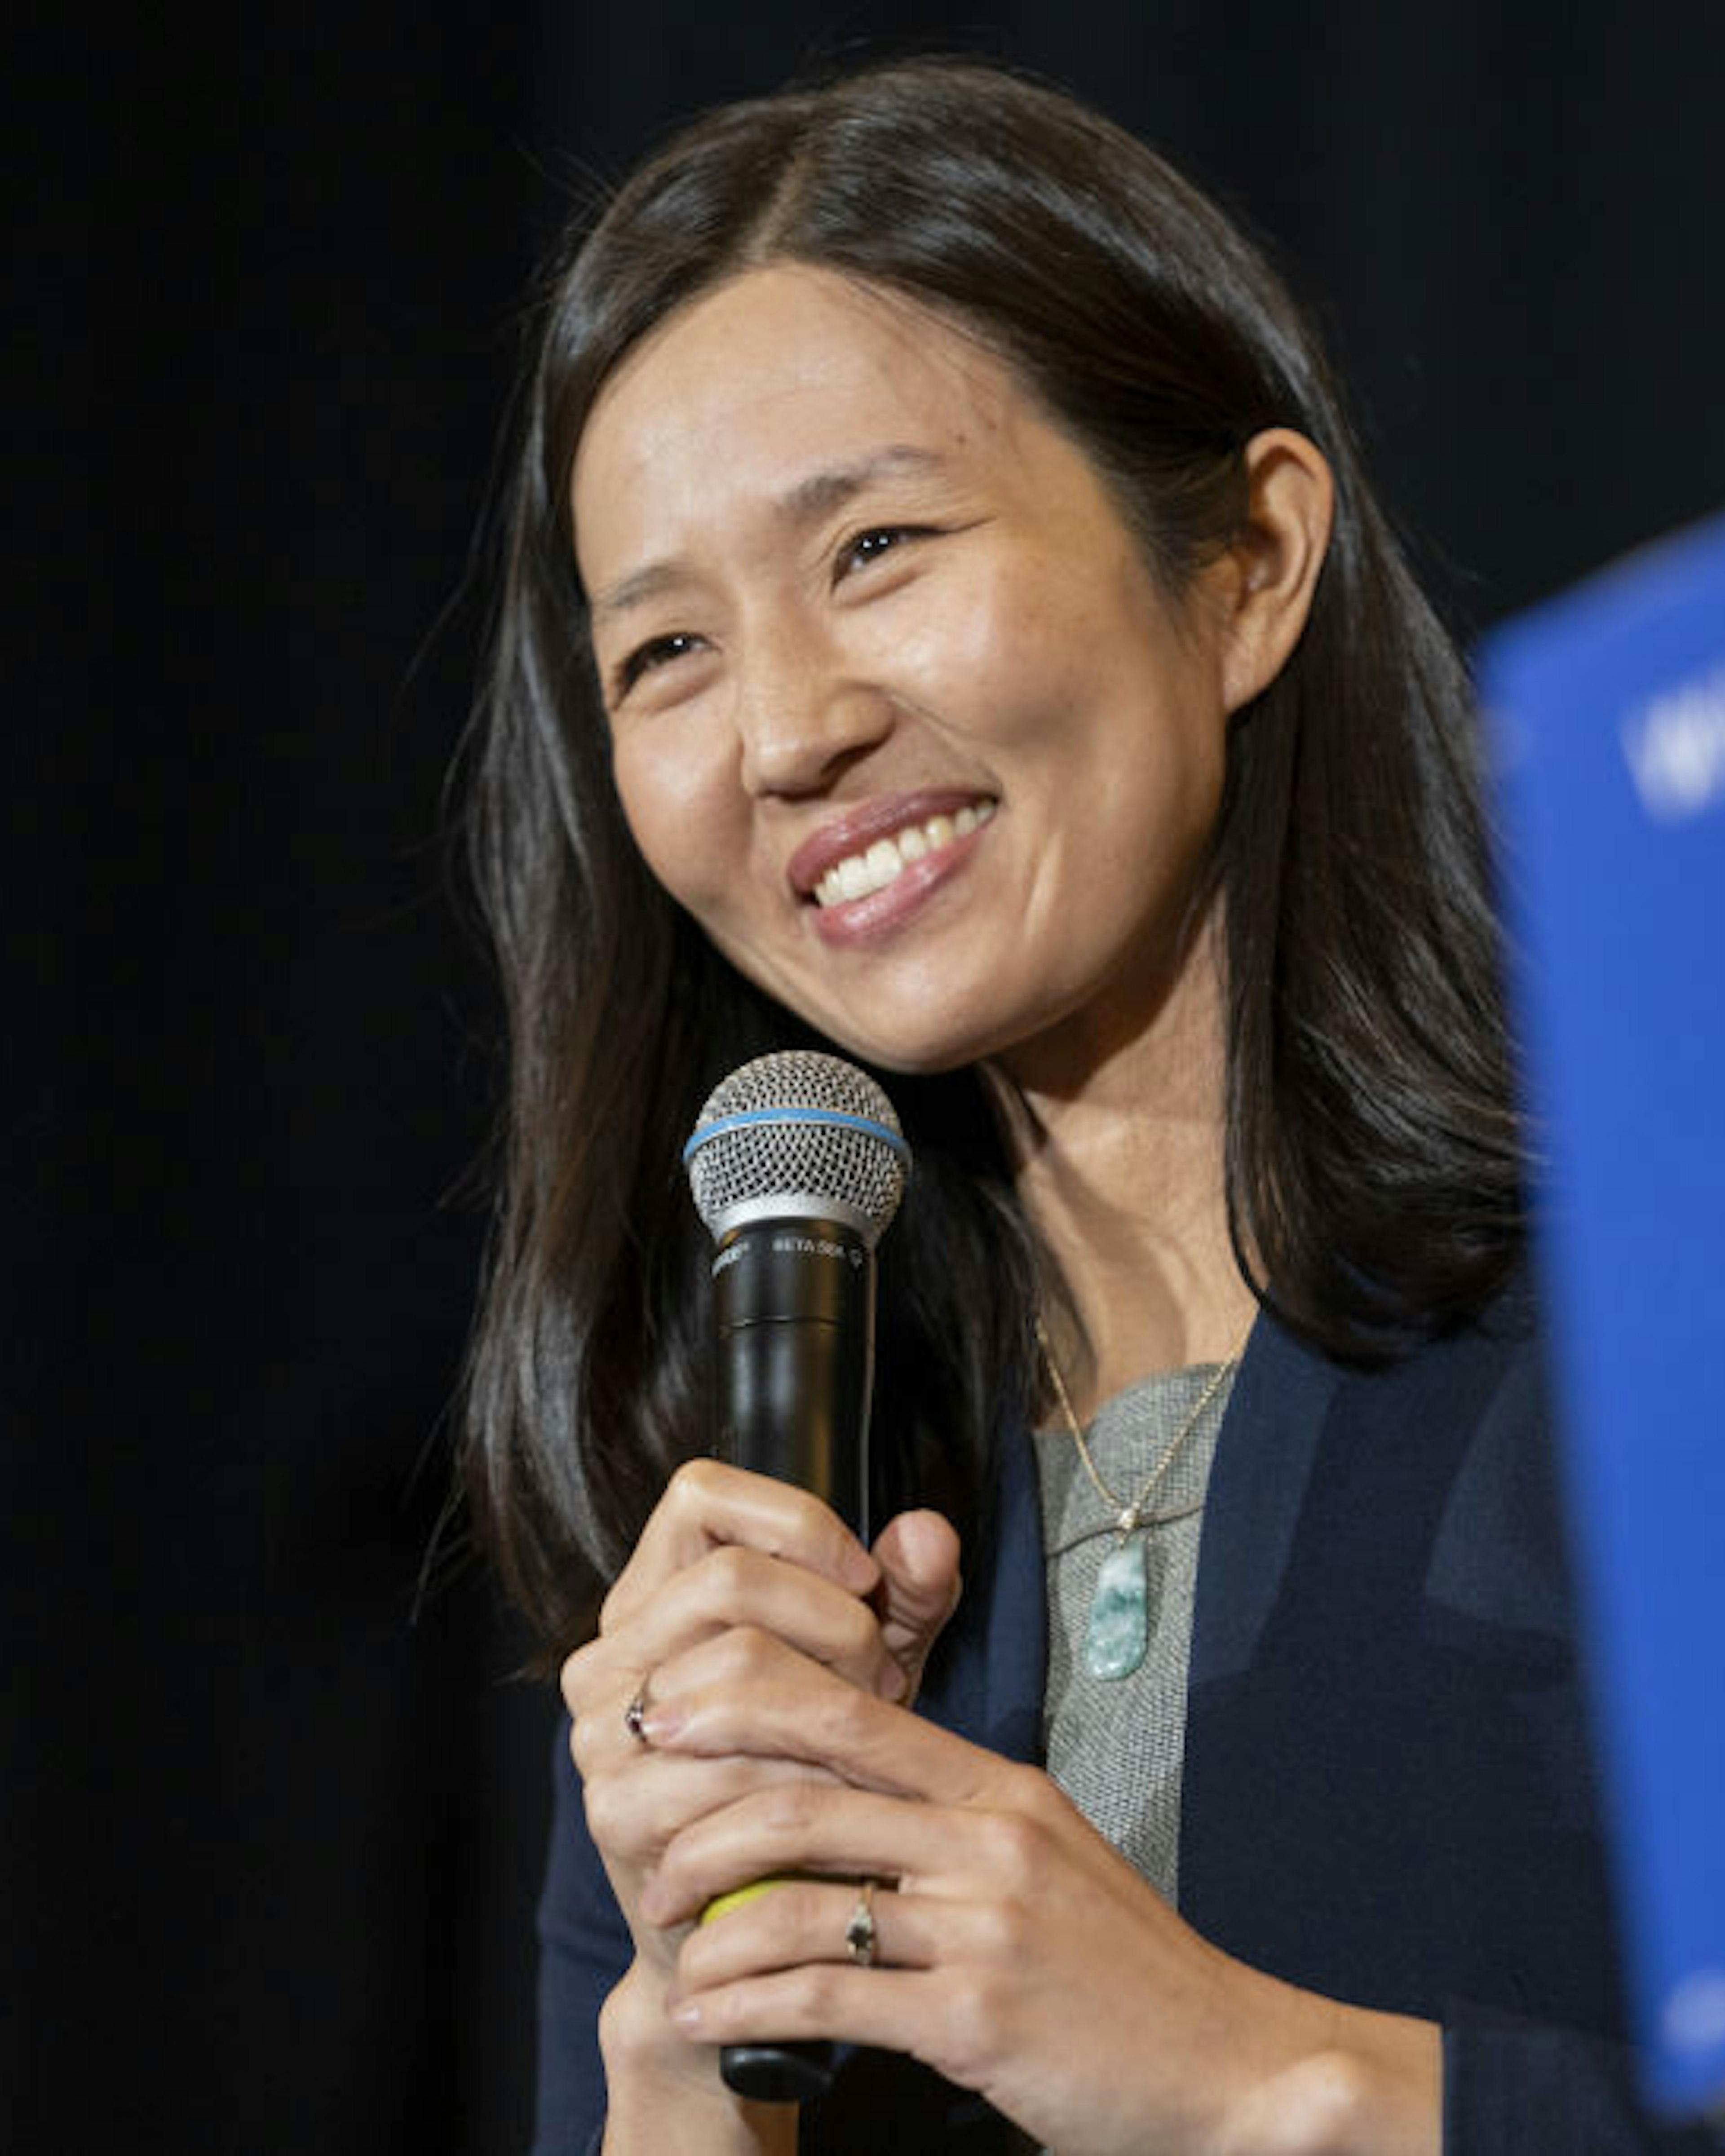 Michelle Wu, mayor of Boston, during a town hall event with Senator Elizabeth Warren, a Democrat from Massachusetts, in Roxbury, Massachusetts, US, on Wednesday, April 12, 2023. Warren formally announced she's seeking a third term in 2024, vowing to continue pressing a progressive agenda that includes stricter rules on banks in the wake of the recent collapse of Silicon Valley Bank and Signature Bank. Photographer: M. Scott Brauer/Bloomberg via Getty Images